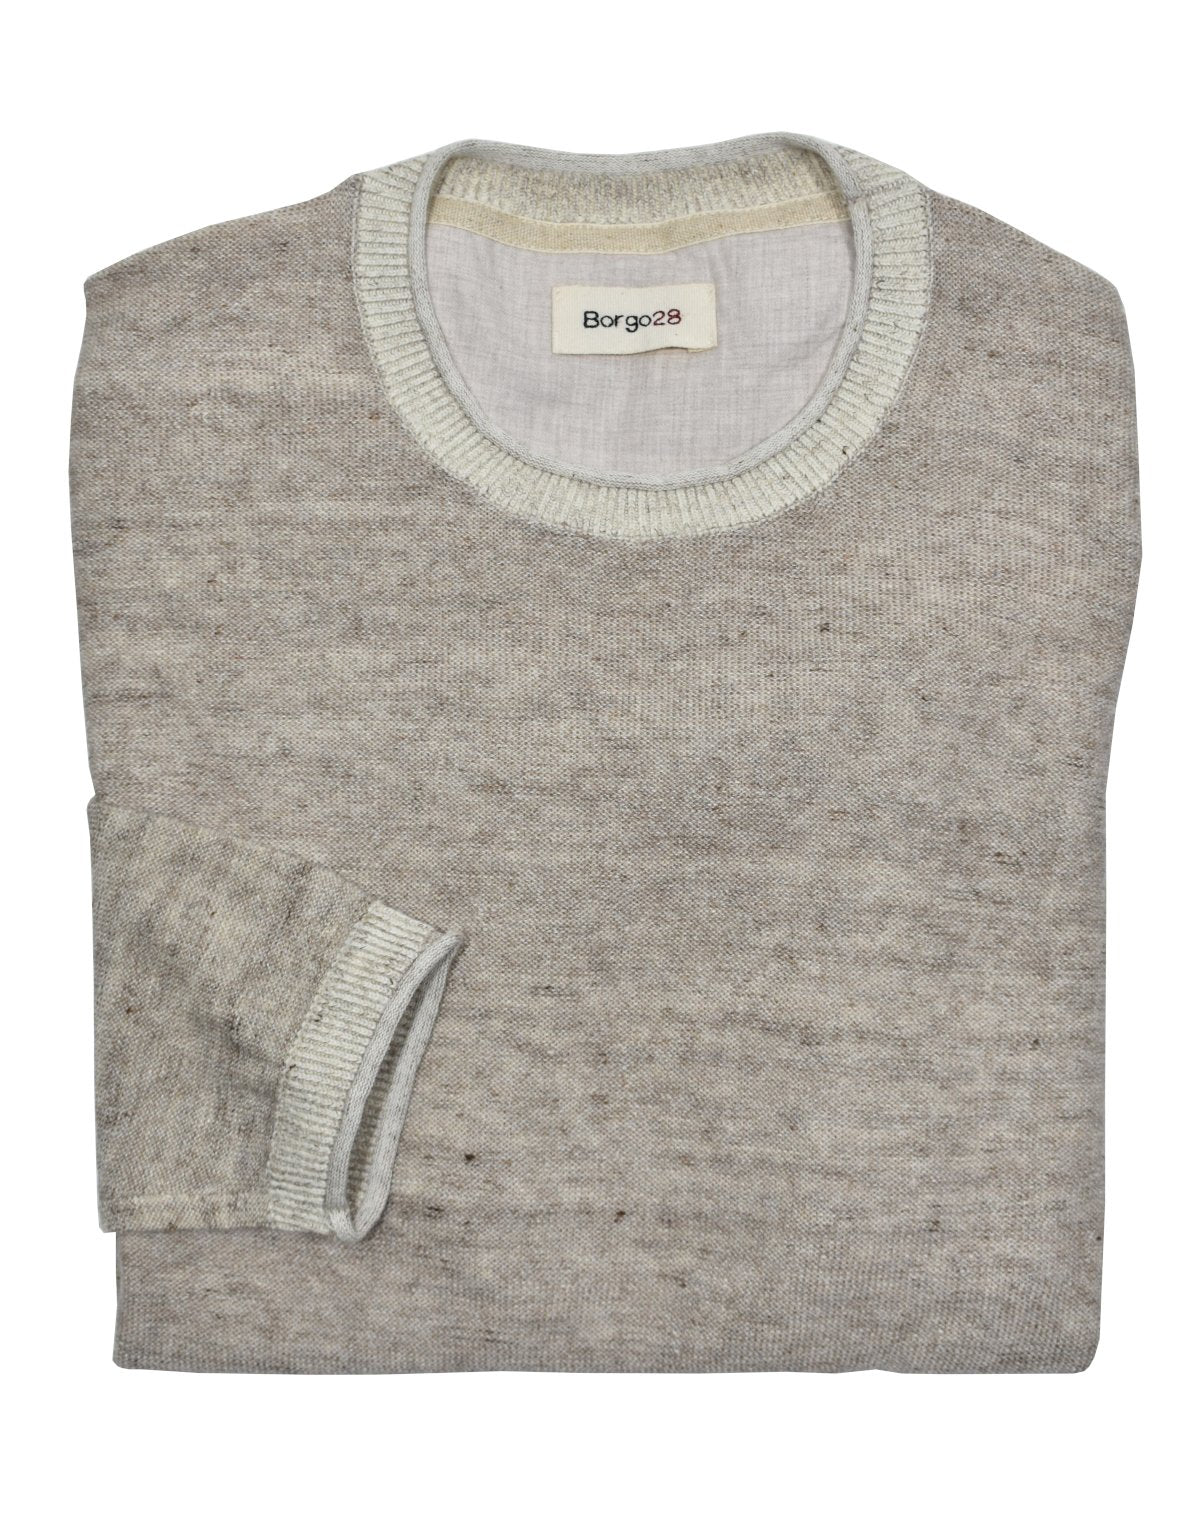 Treat yourself to everyday comfort and style with our ZB405 Boardwalk Washed Cotton Knit! Crafted from a unique blend of 50% cotton and 50% linen, you'll love how soft and comfortable this knit feels, plus its relaxed look. Finished with stylish ribbed cuffs and bands with a curled knit effect and a classic fit, this knit is perfect for everyday wear.